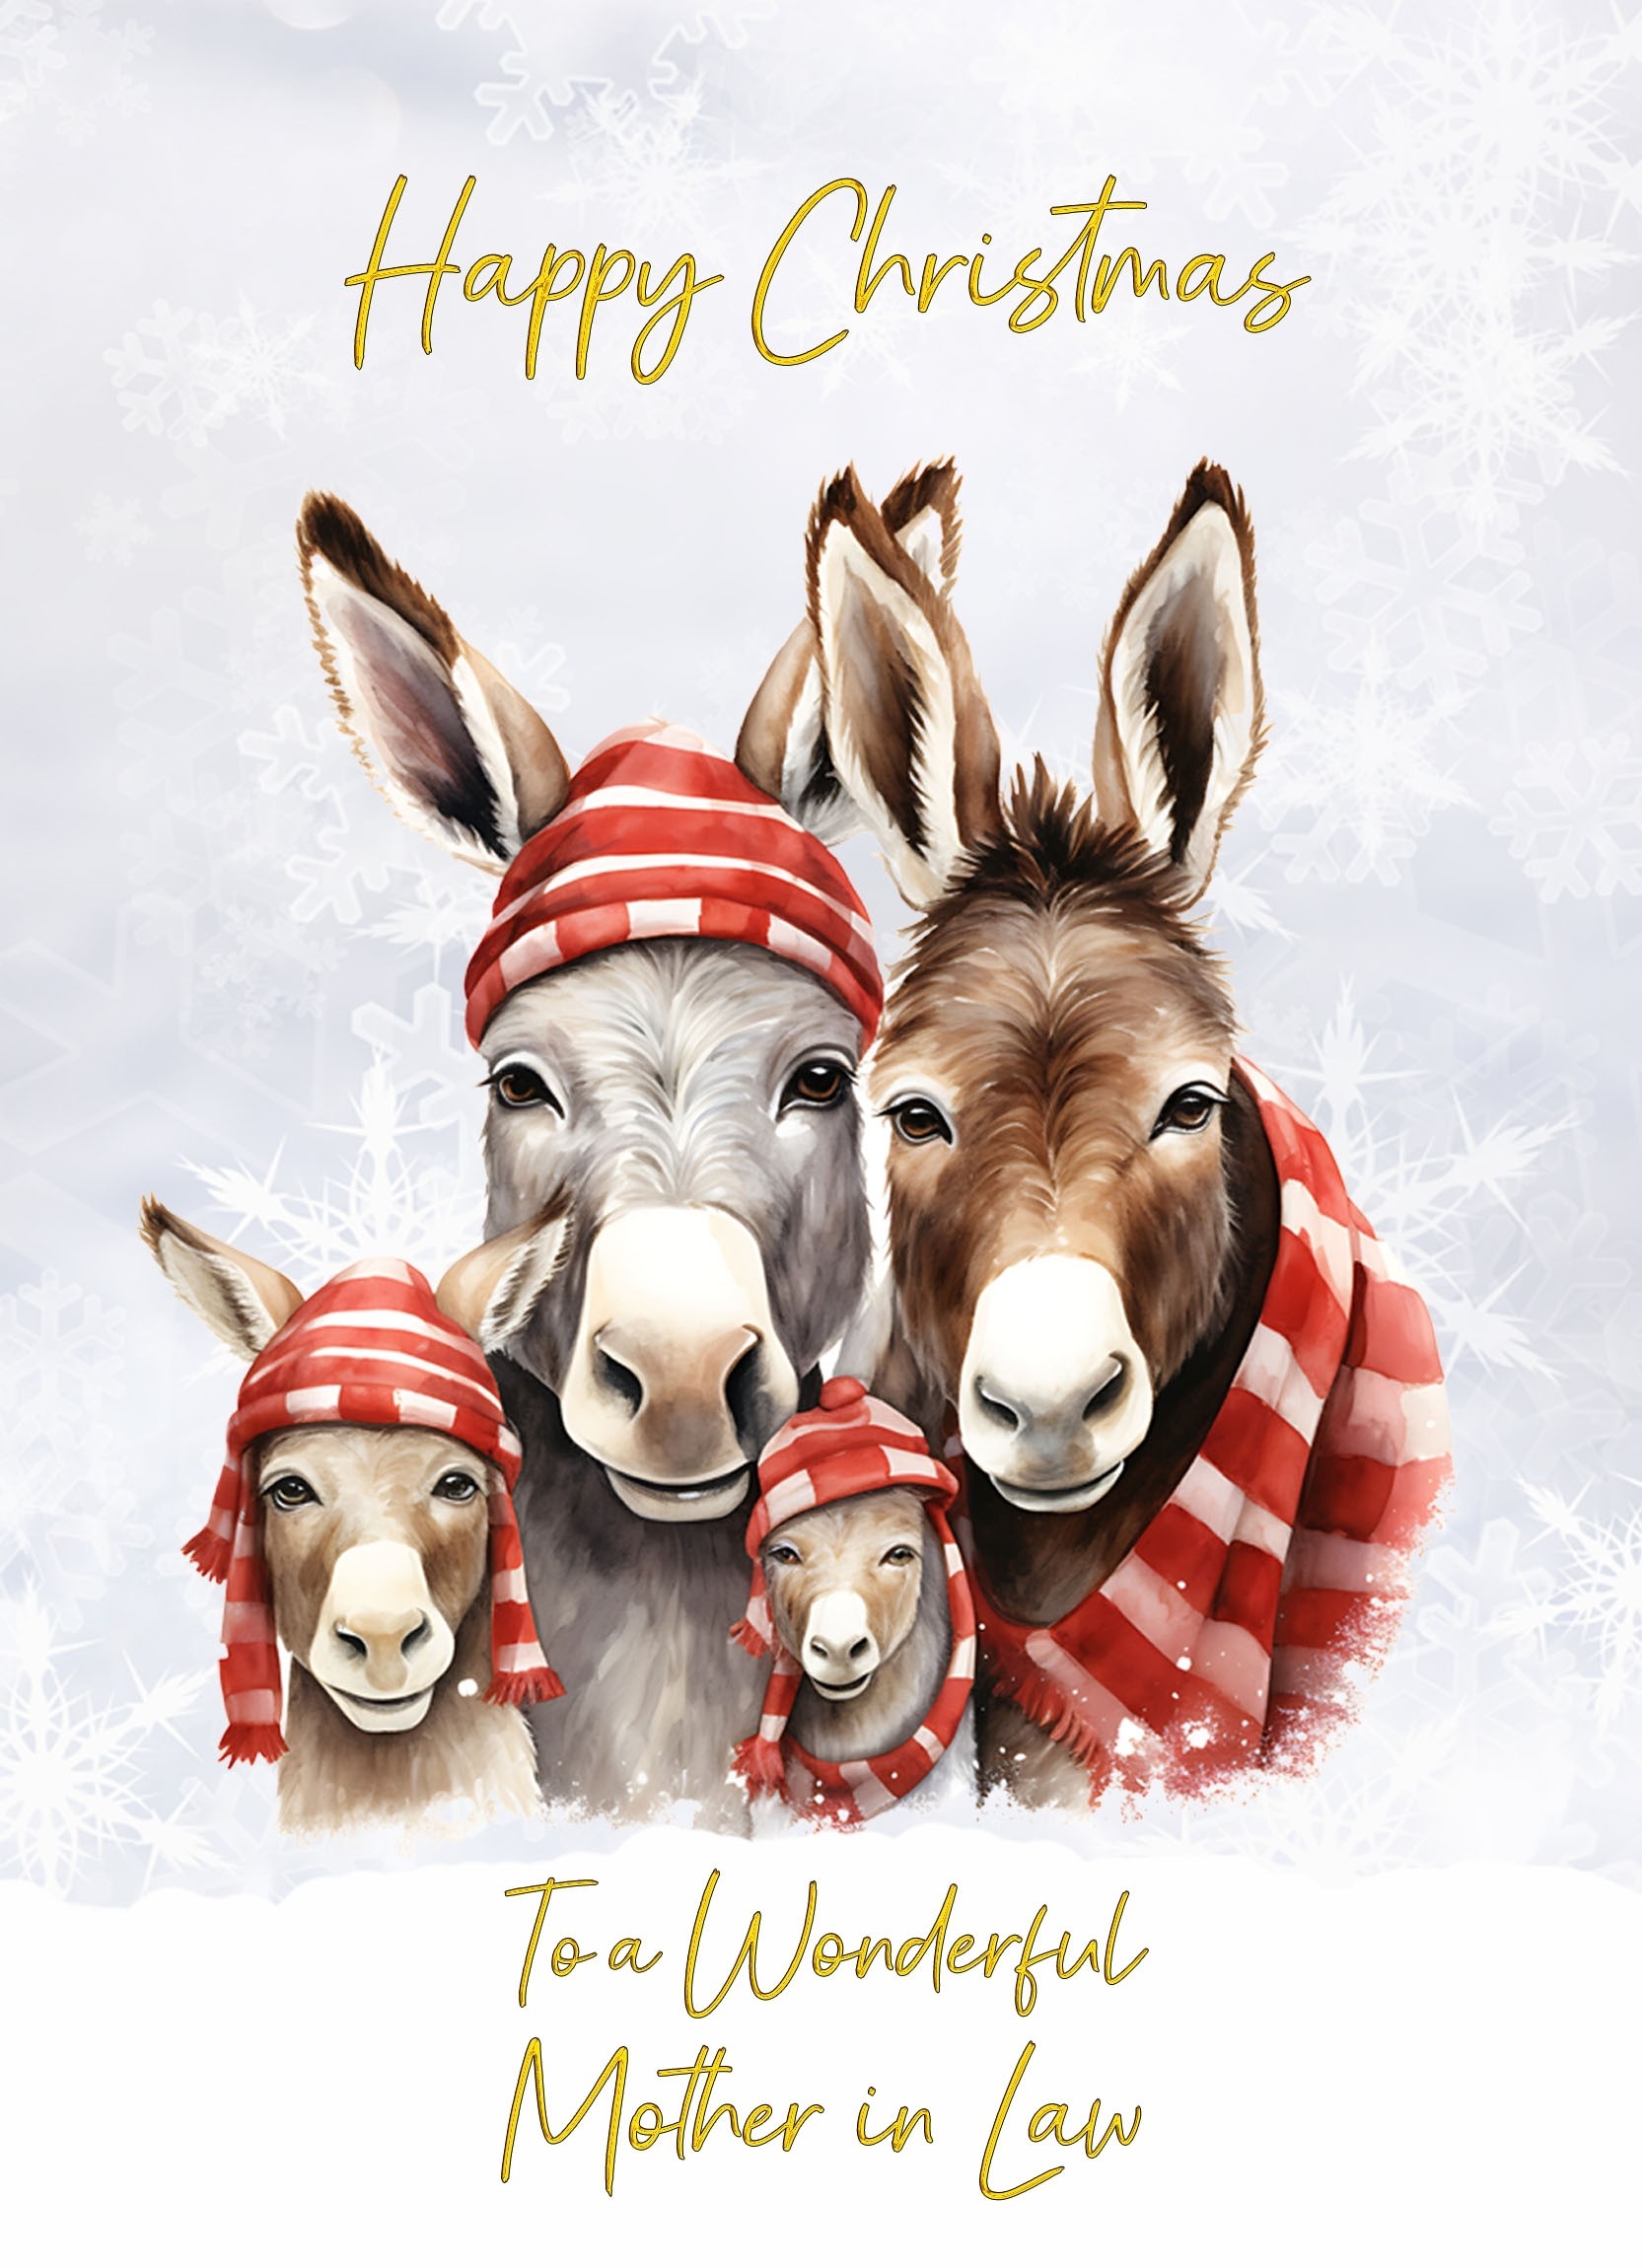 Christmas Card For Mother in Law (Donkey Family Art)